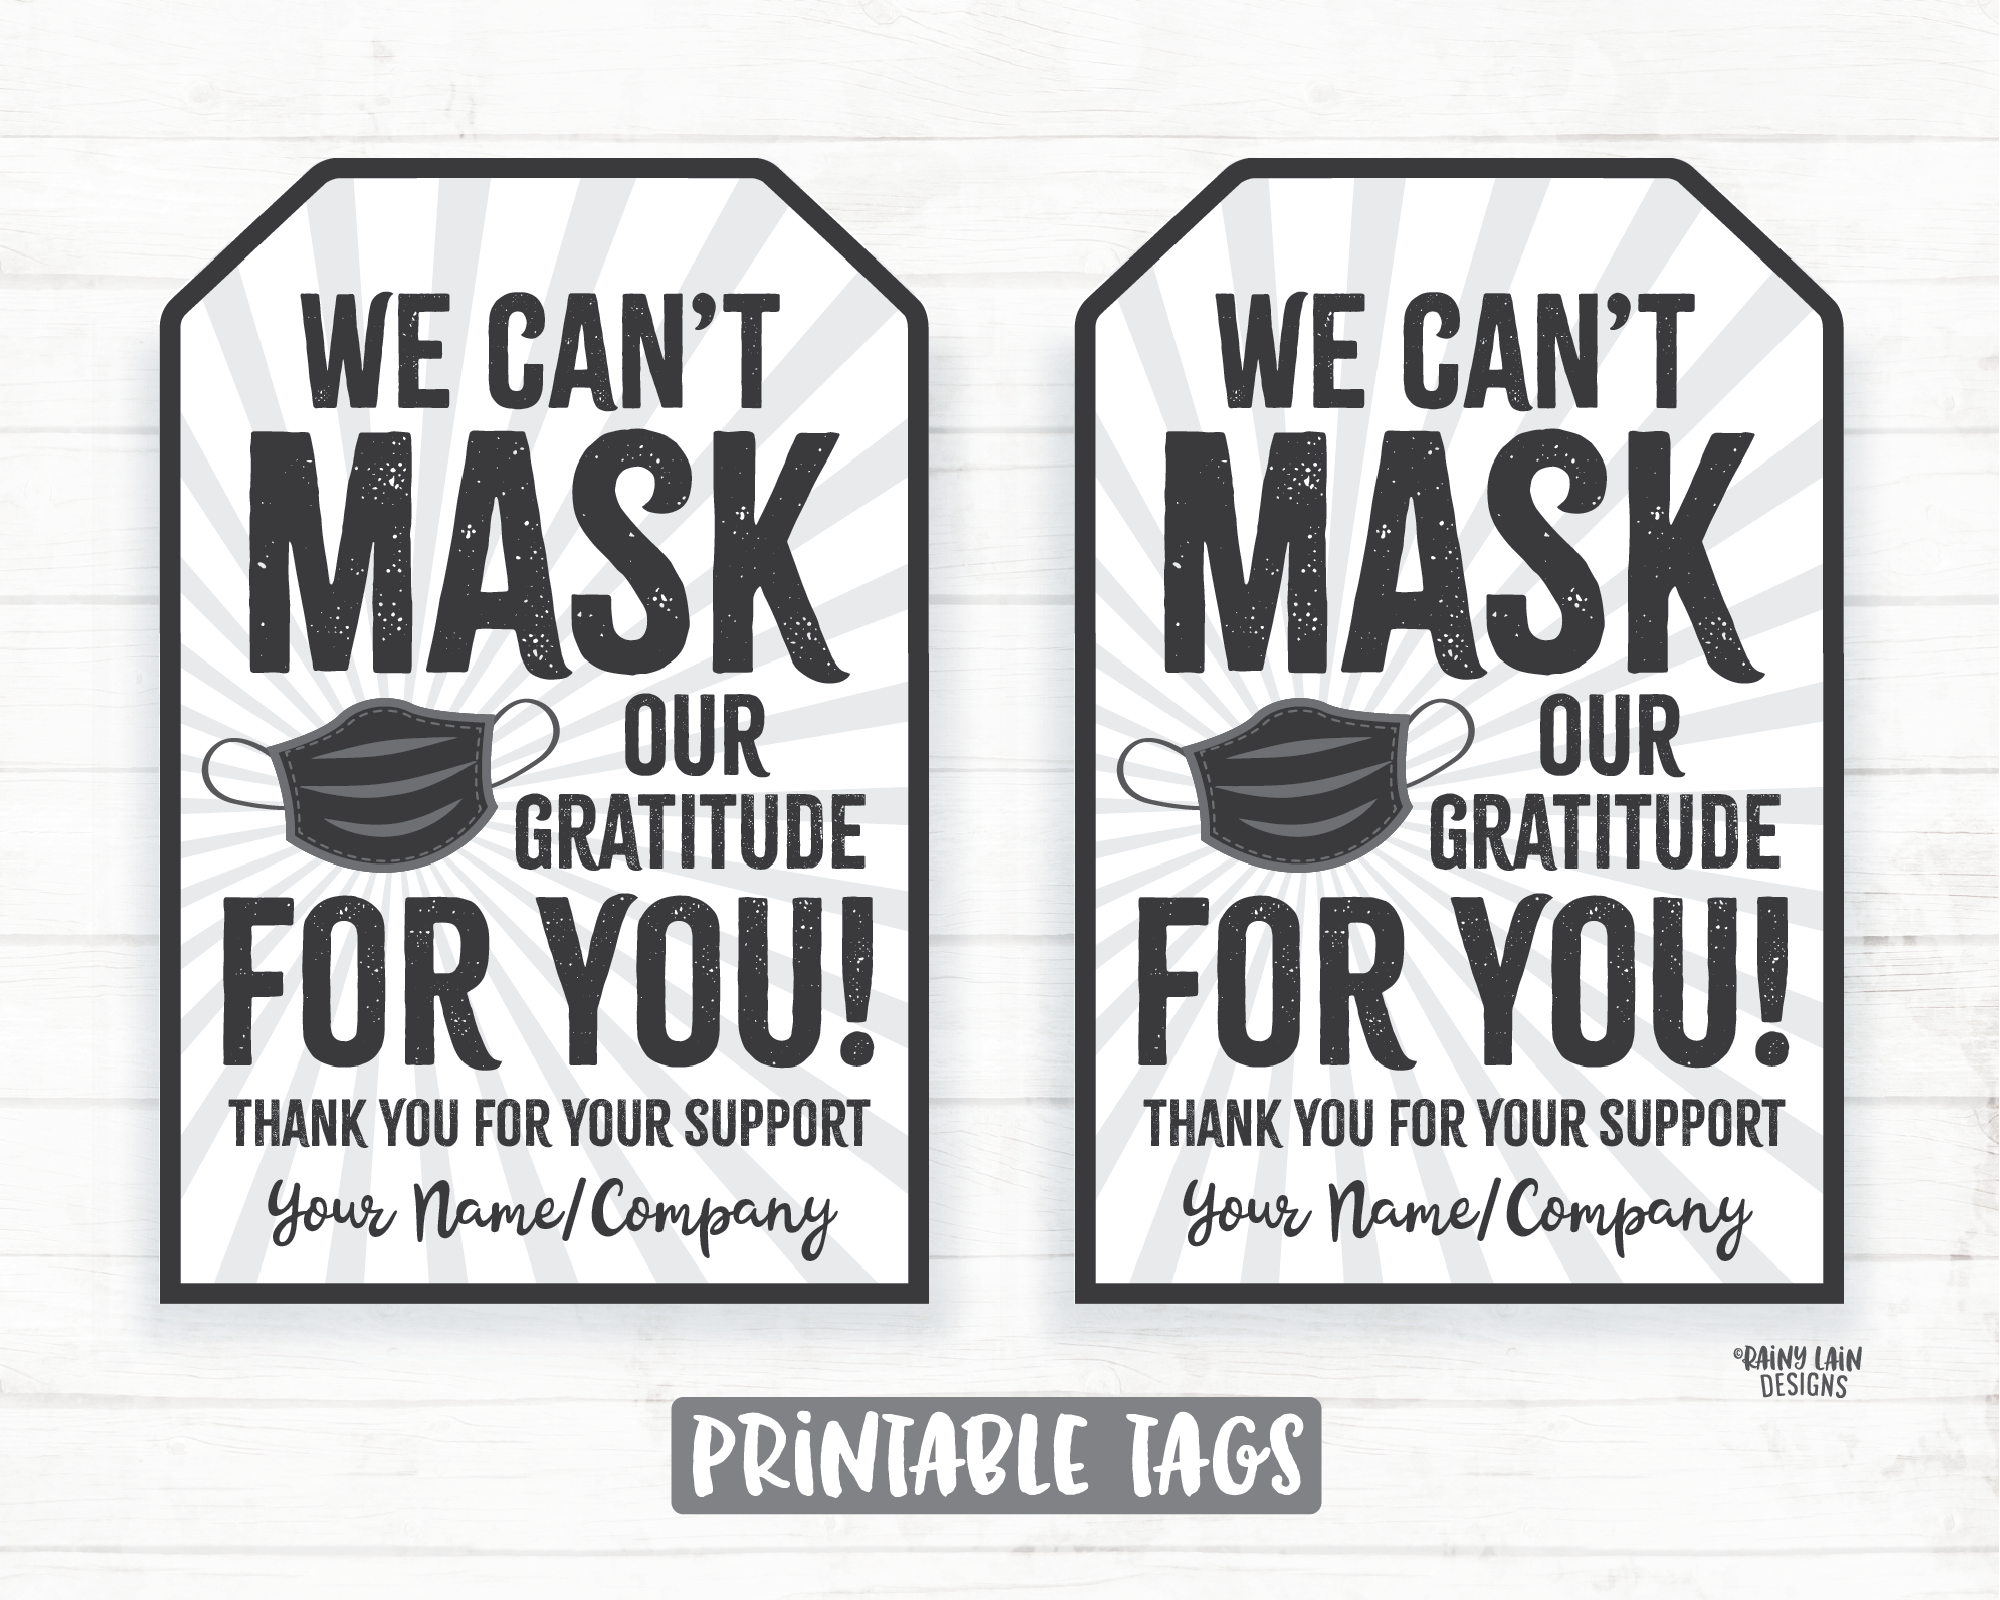 Can't Mask our Gratitude Tag Face Mask Gift Teacher Mask Tag Employee Appreciation Tag Company Frontline Essential Worker Staff Corporate